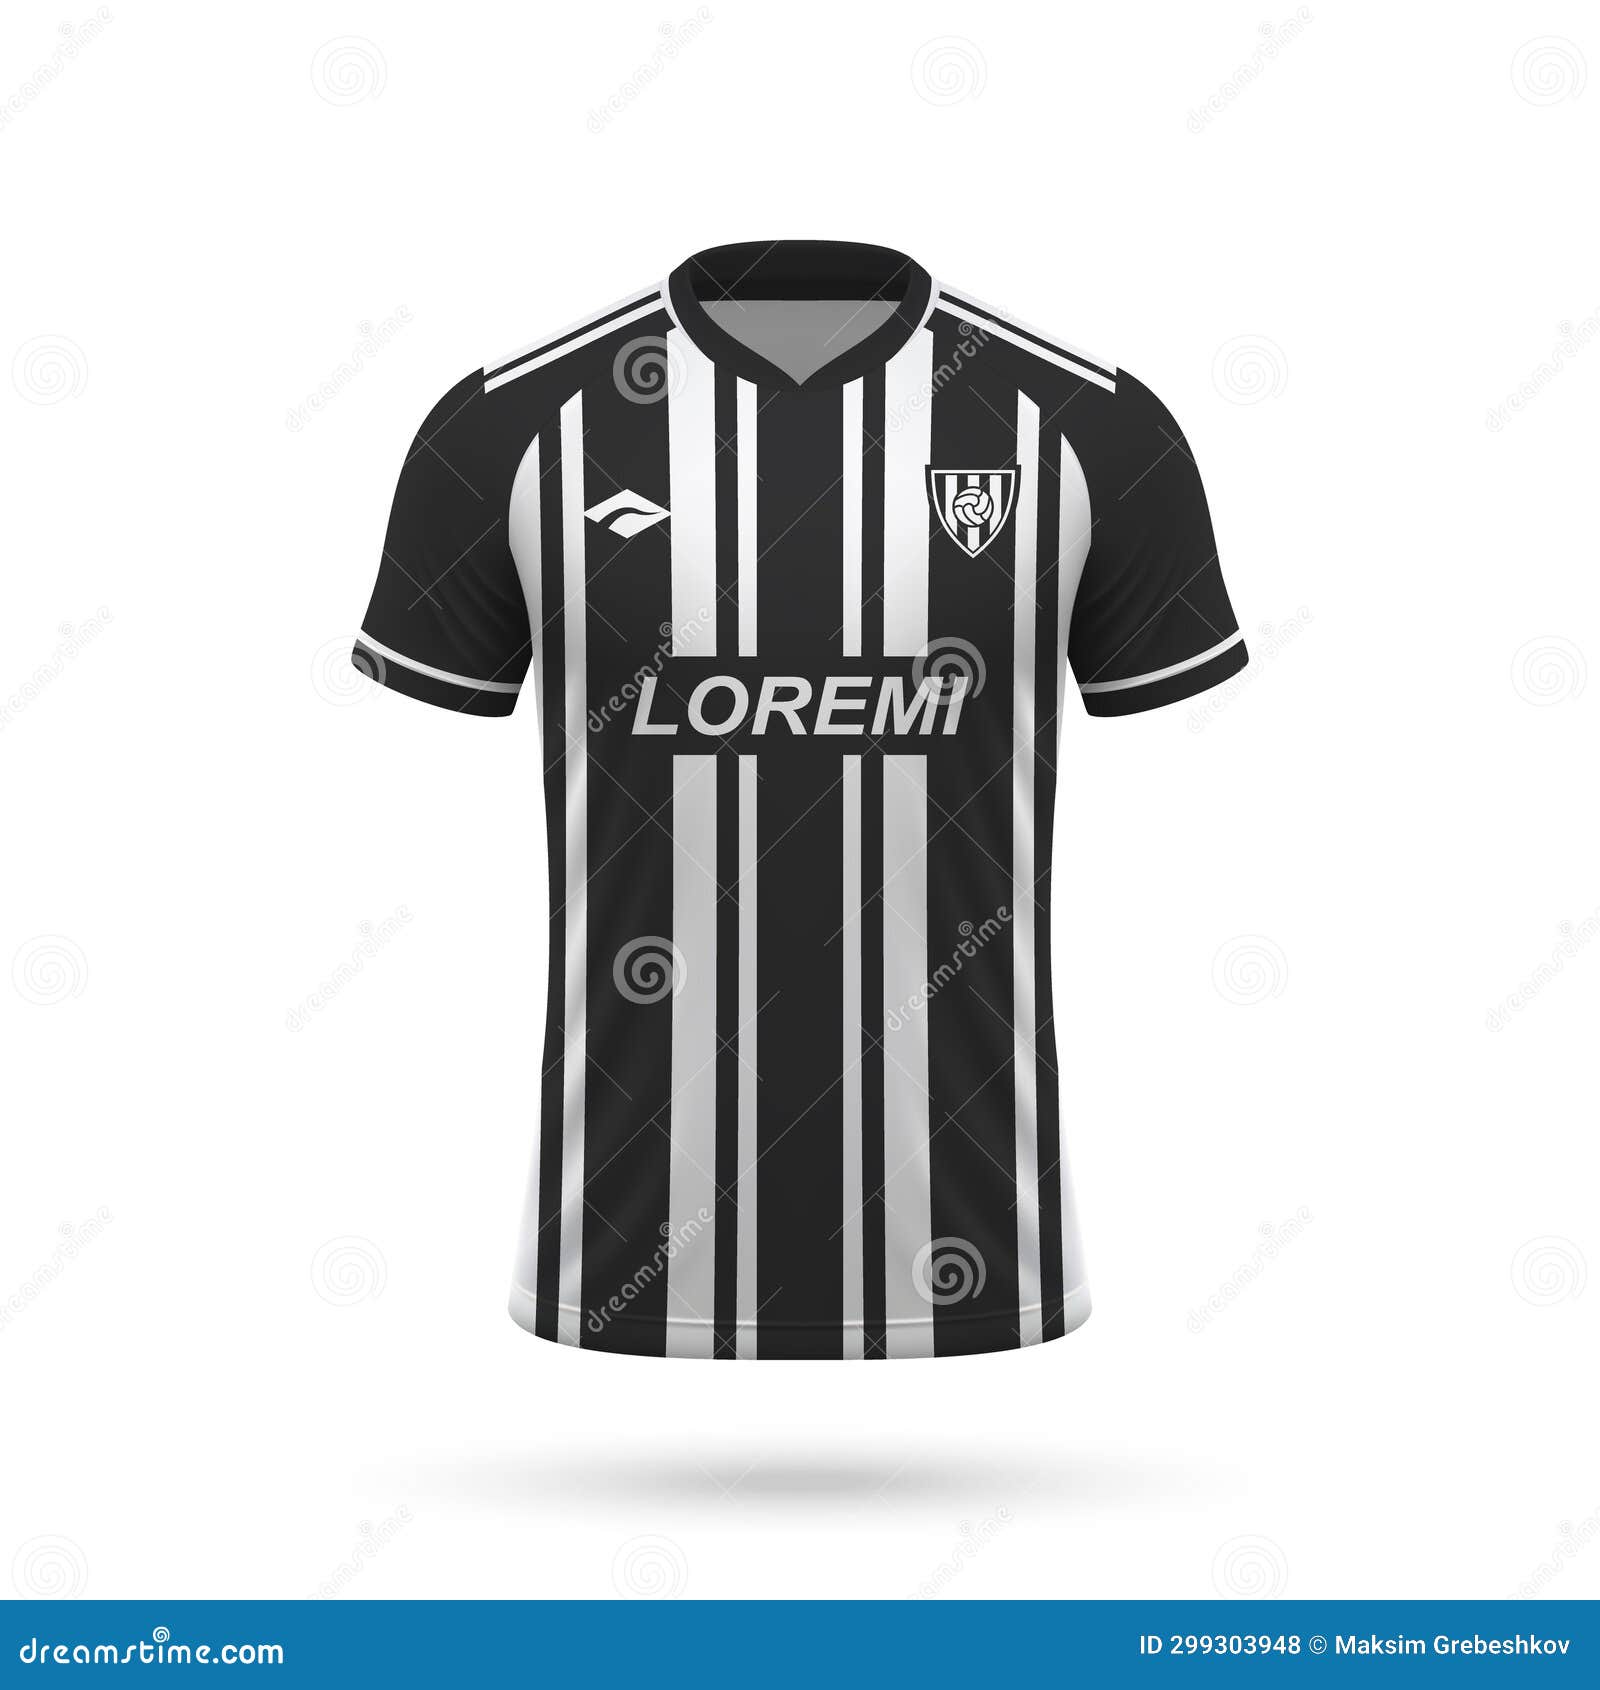 3d realistic soccer jersey in atletico mineiro style